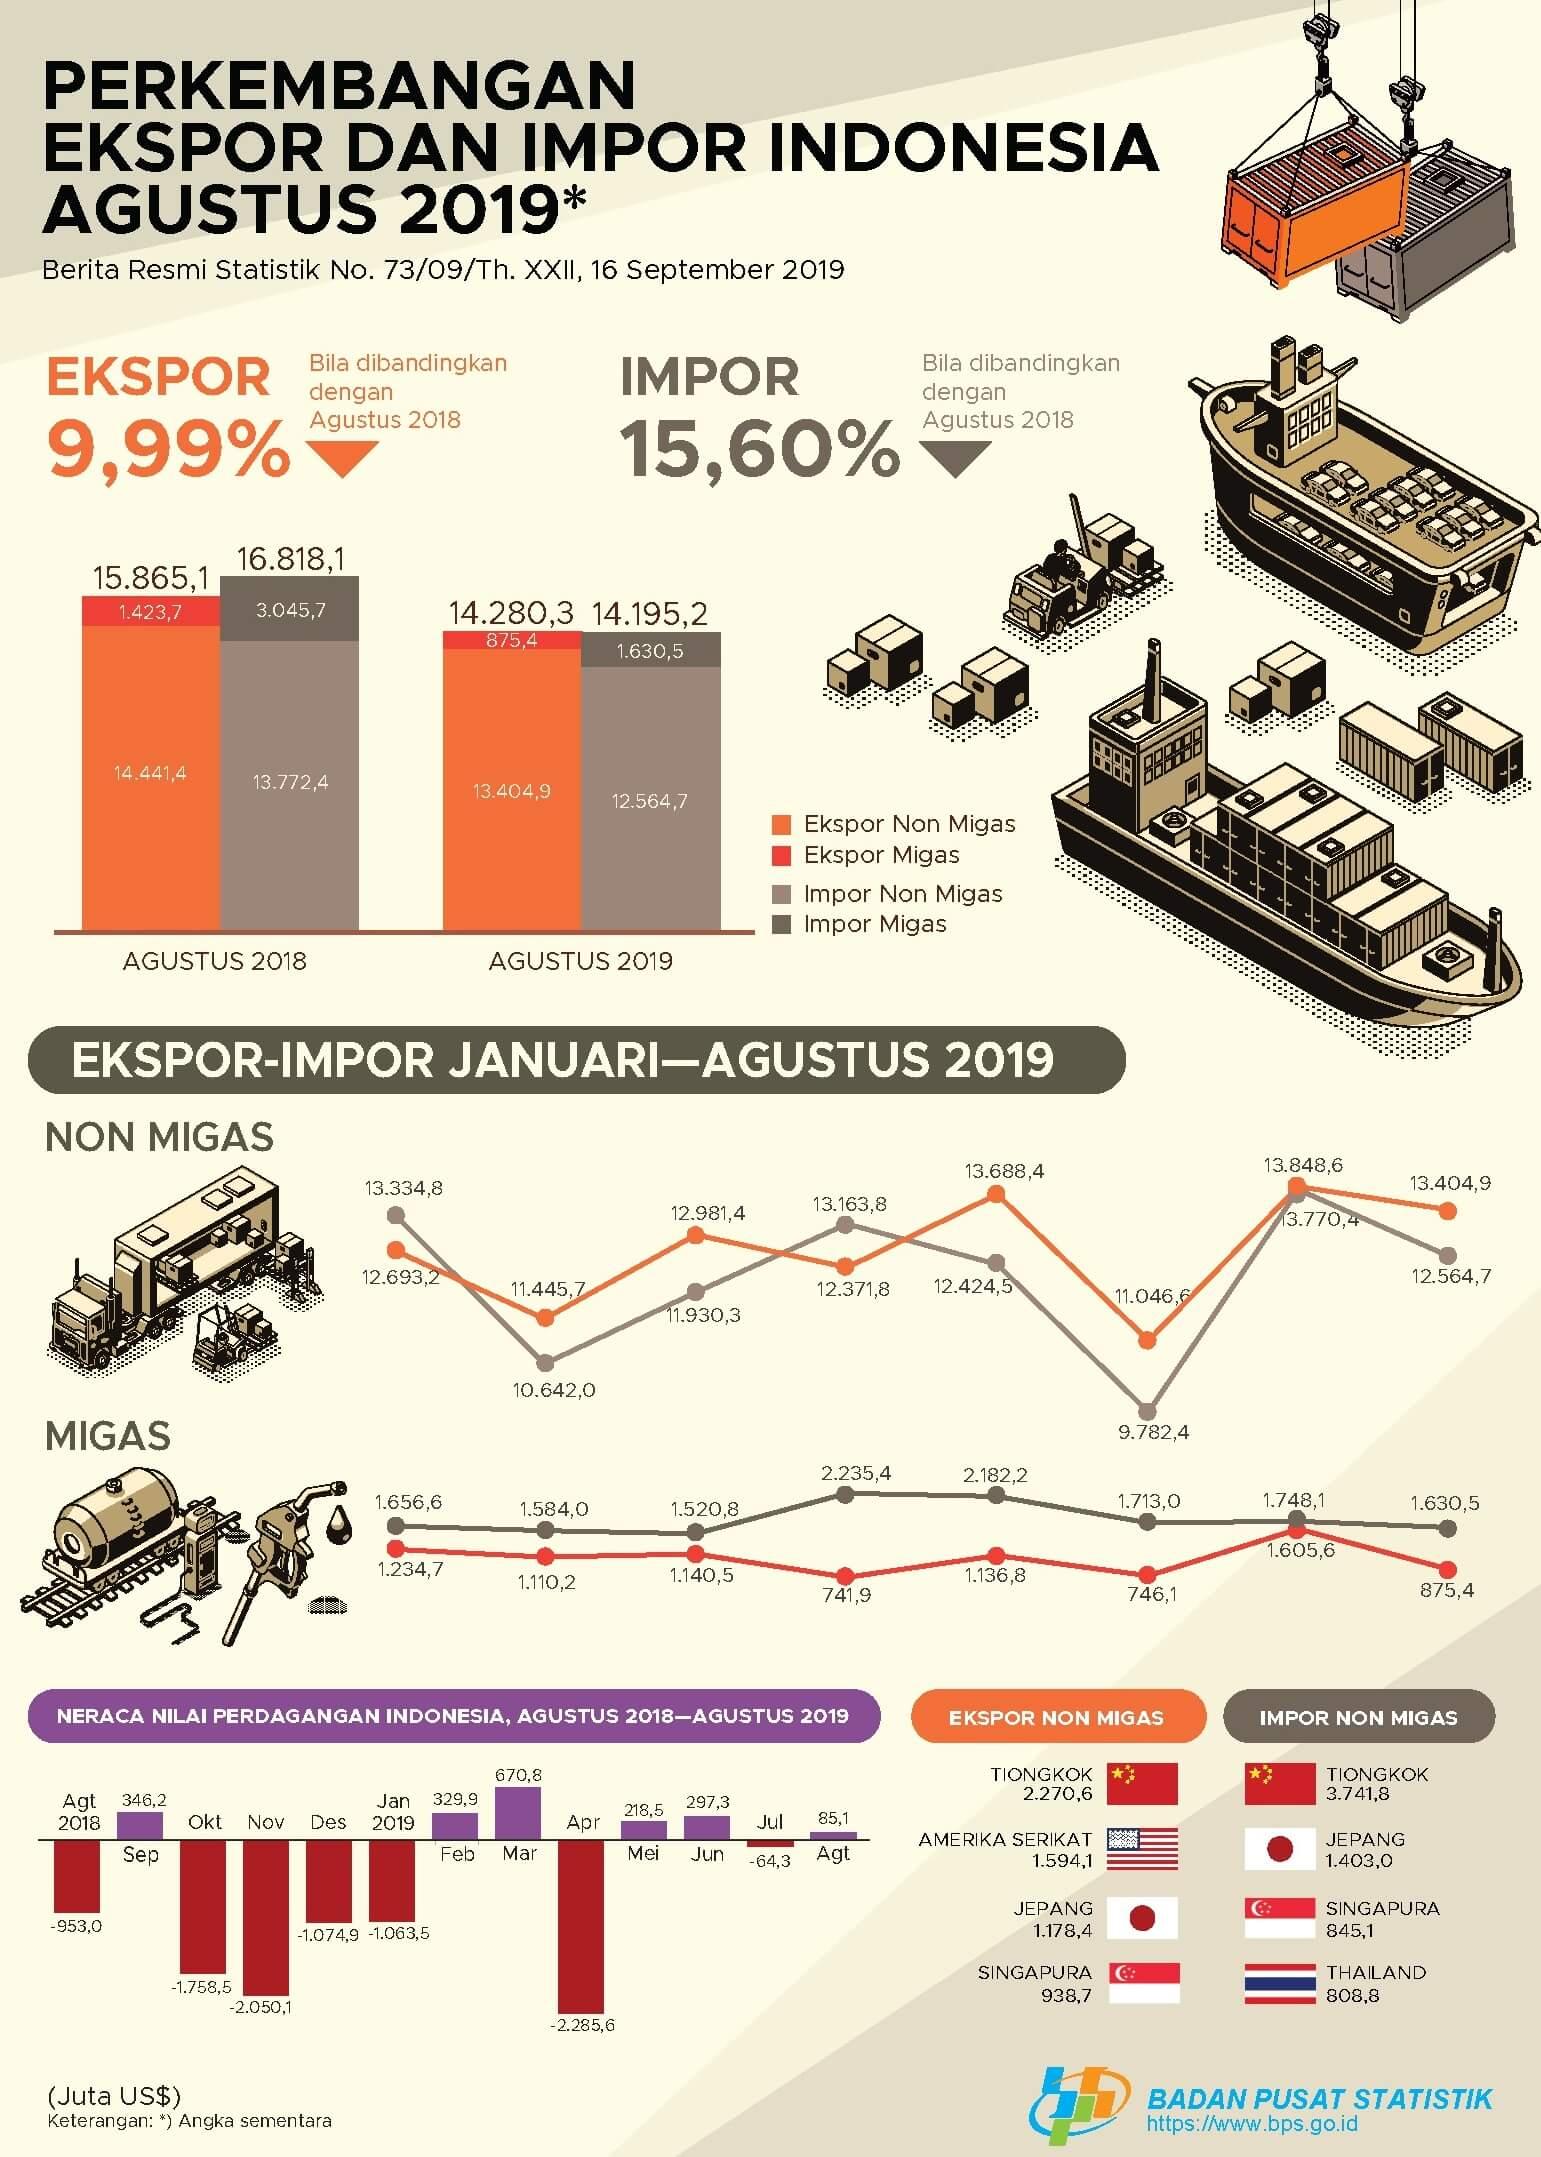 August 2019 Exports Reached US$ 14.28 Billion. August 2019 Imports Reached US$ 14.20 Billion, decreased 8.53 percent compared to July 2019.